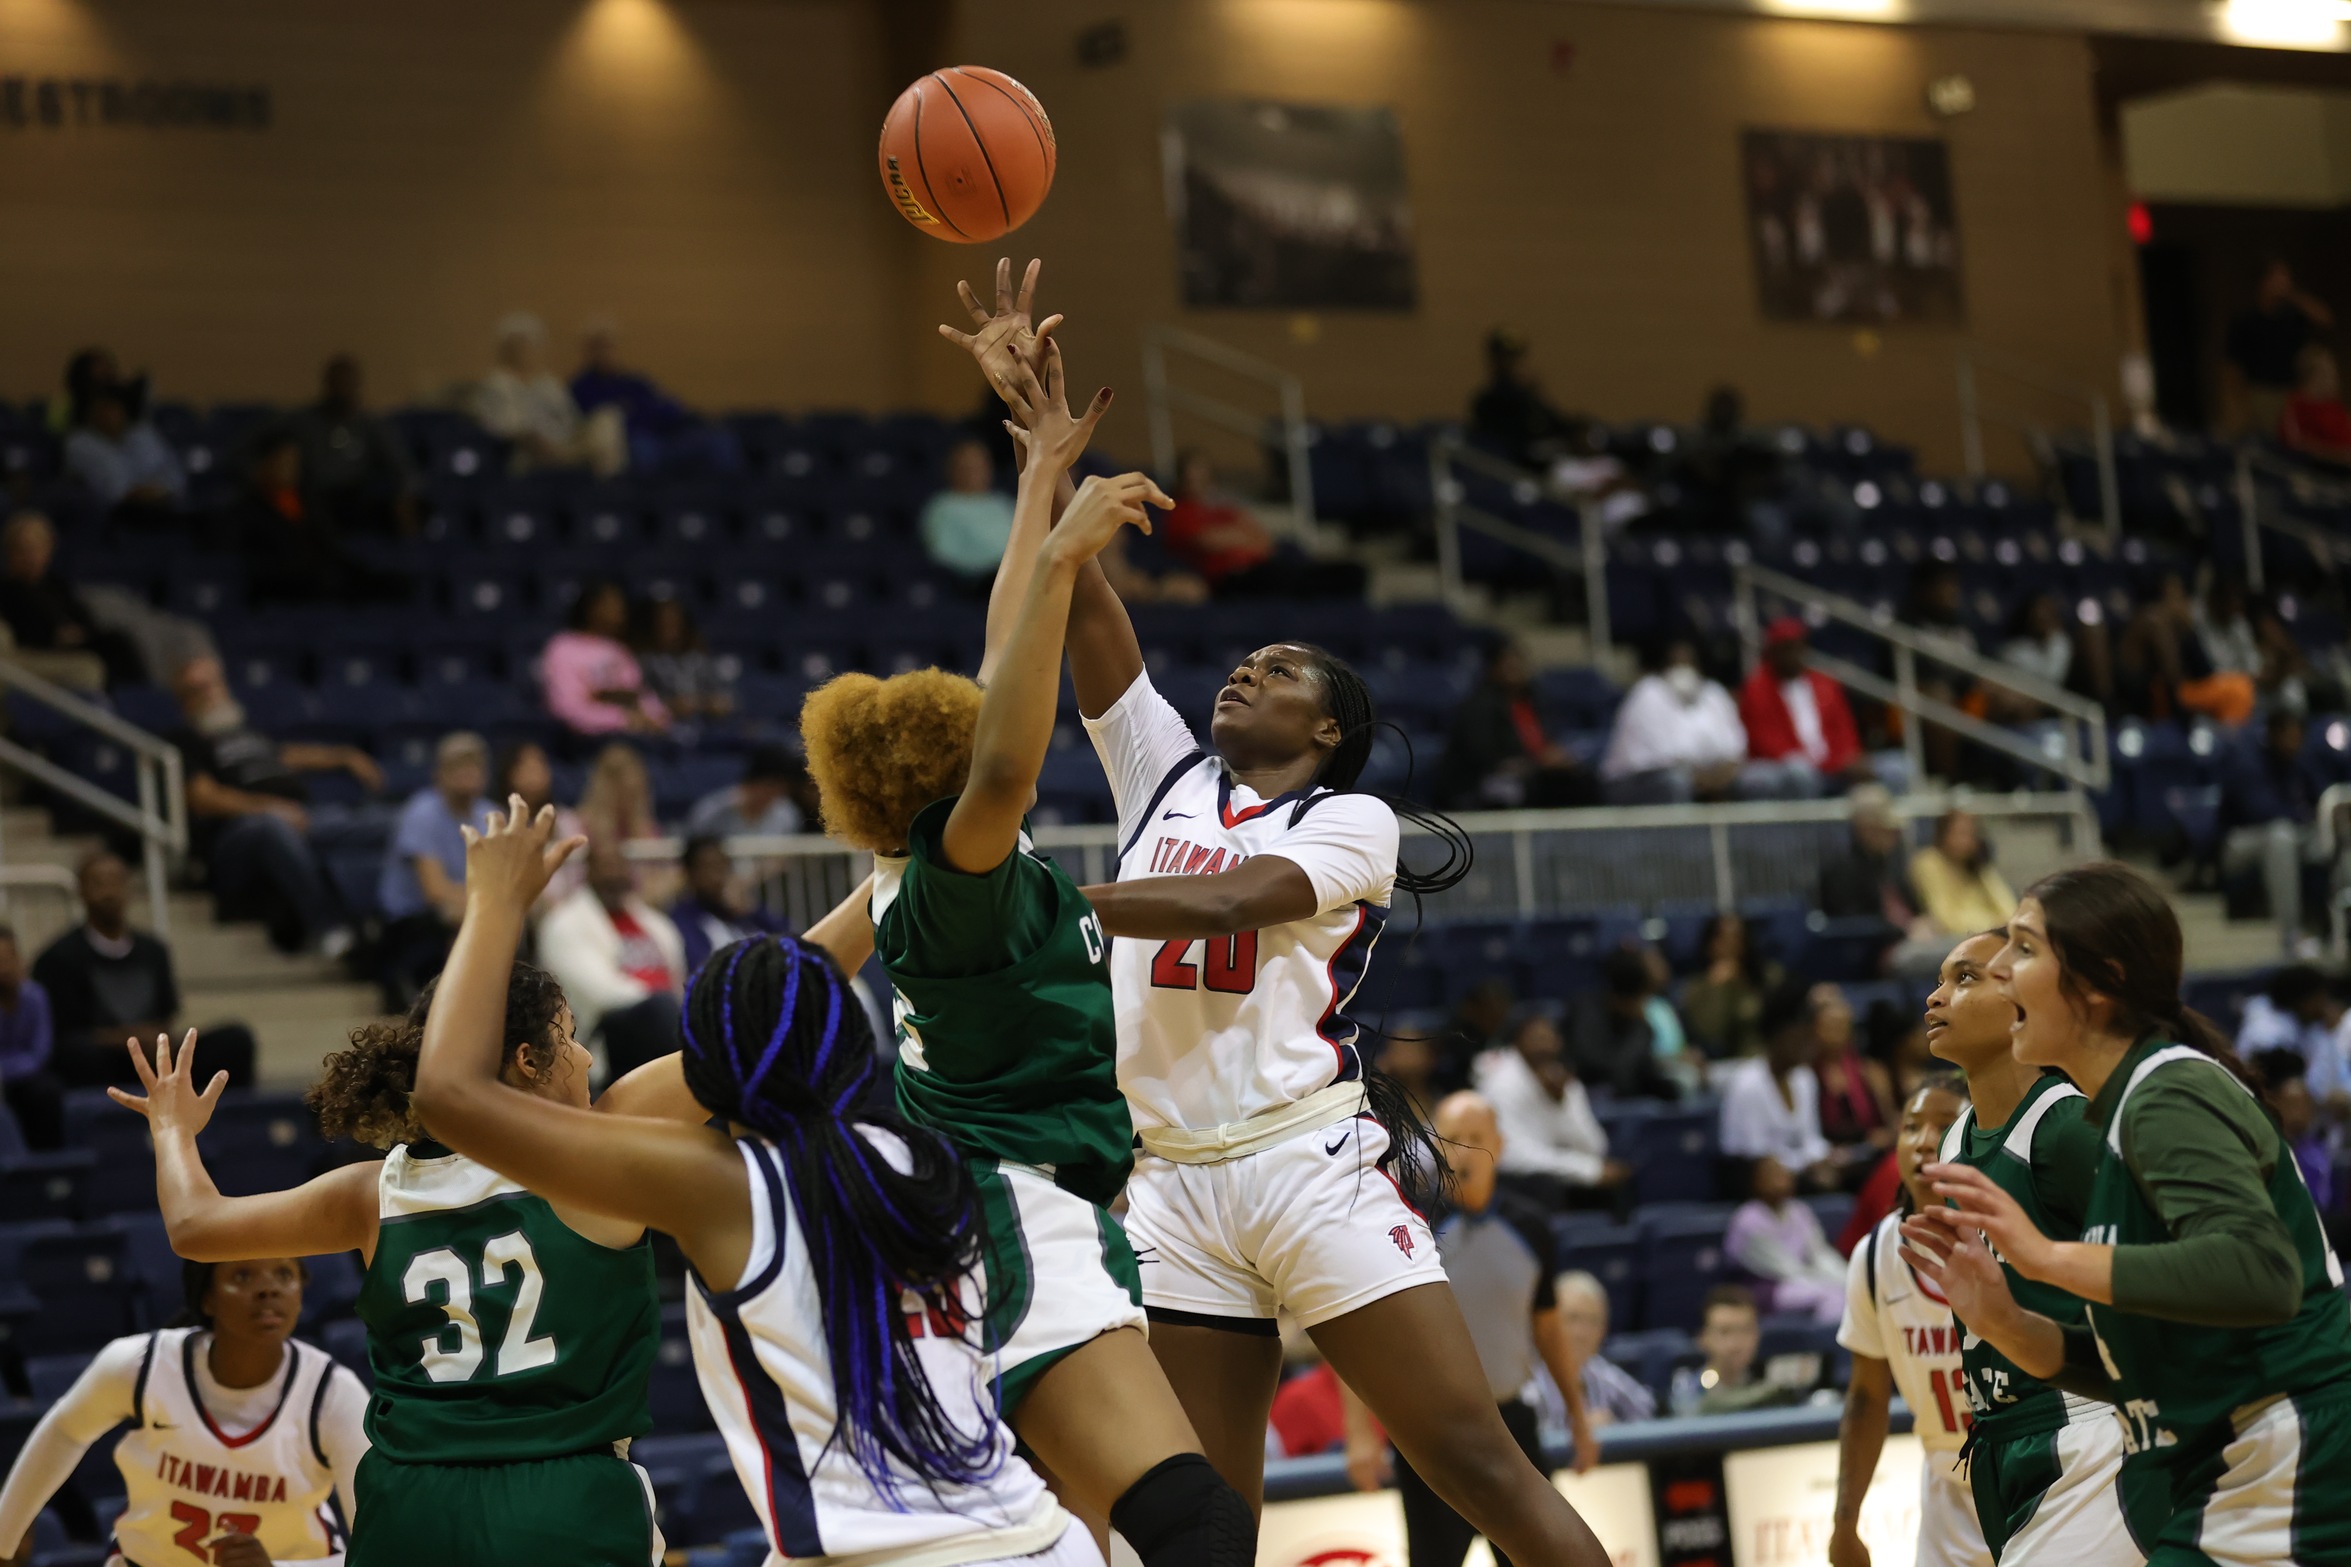 Lady Indians dominate Motlow State